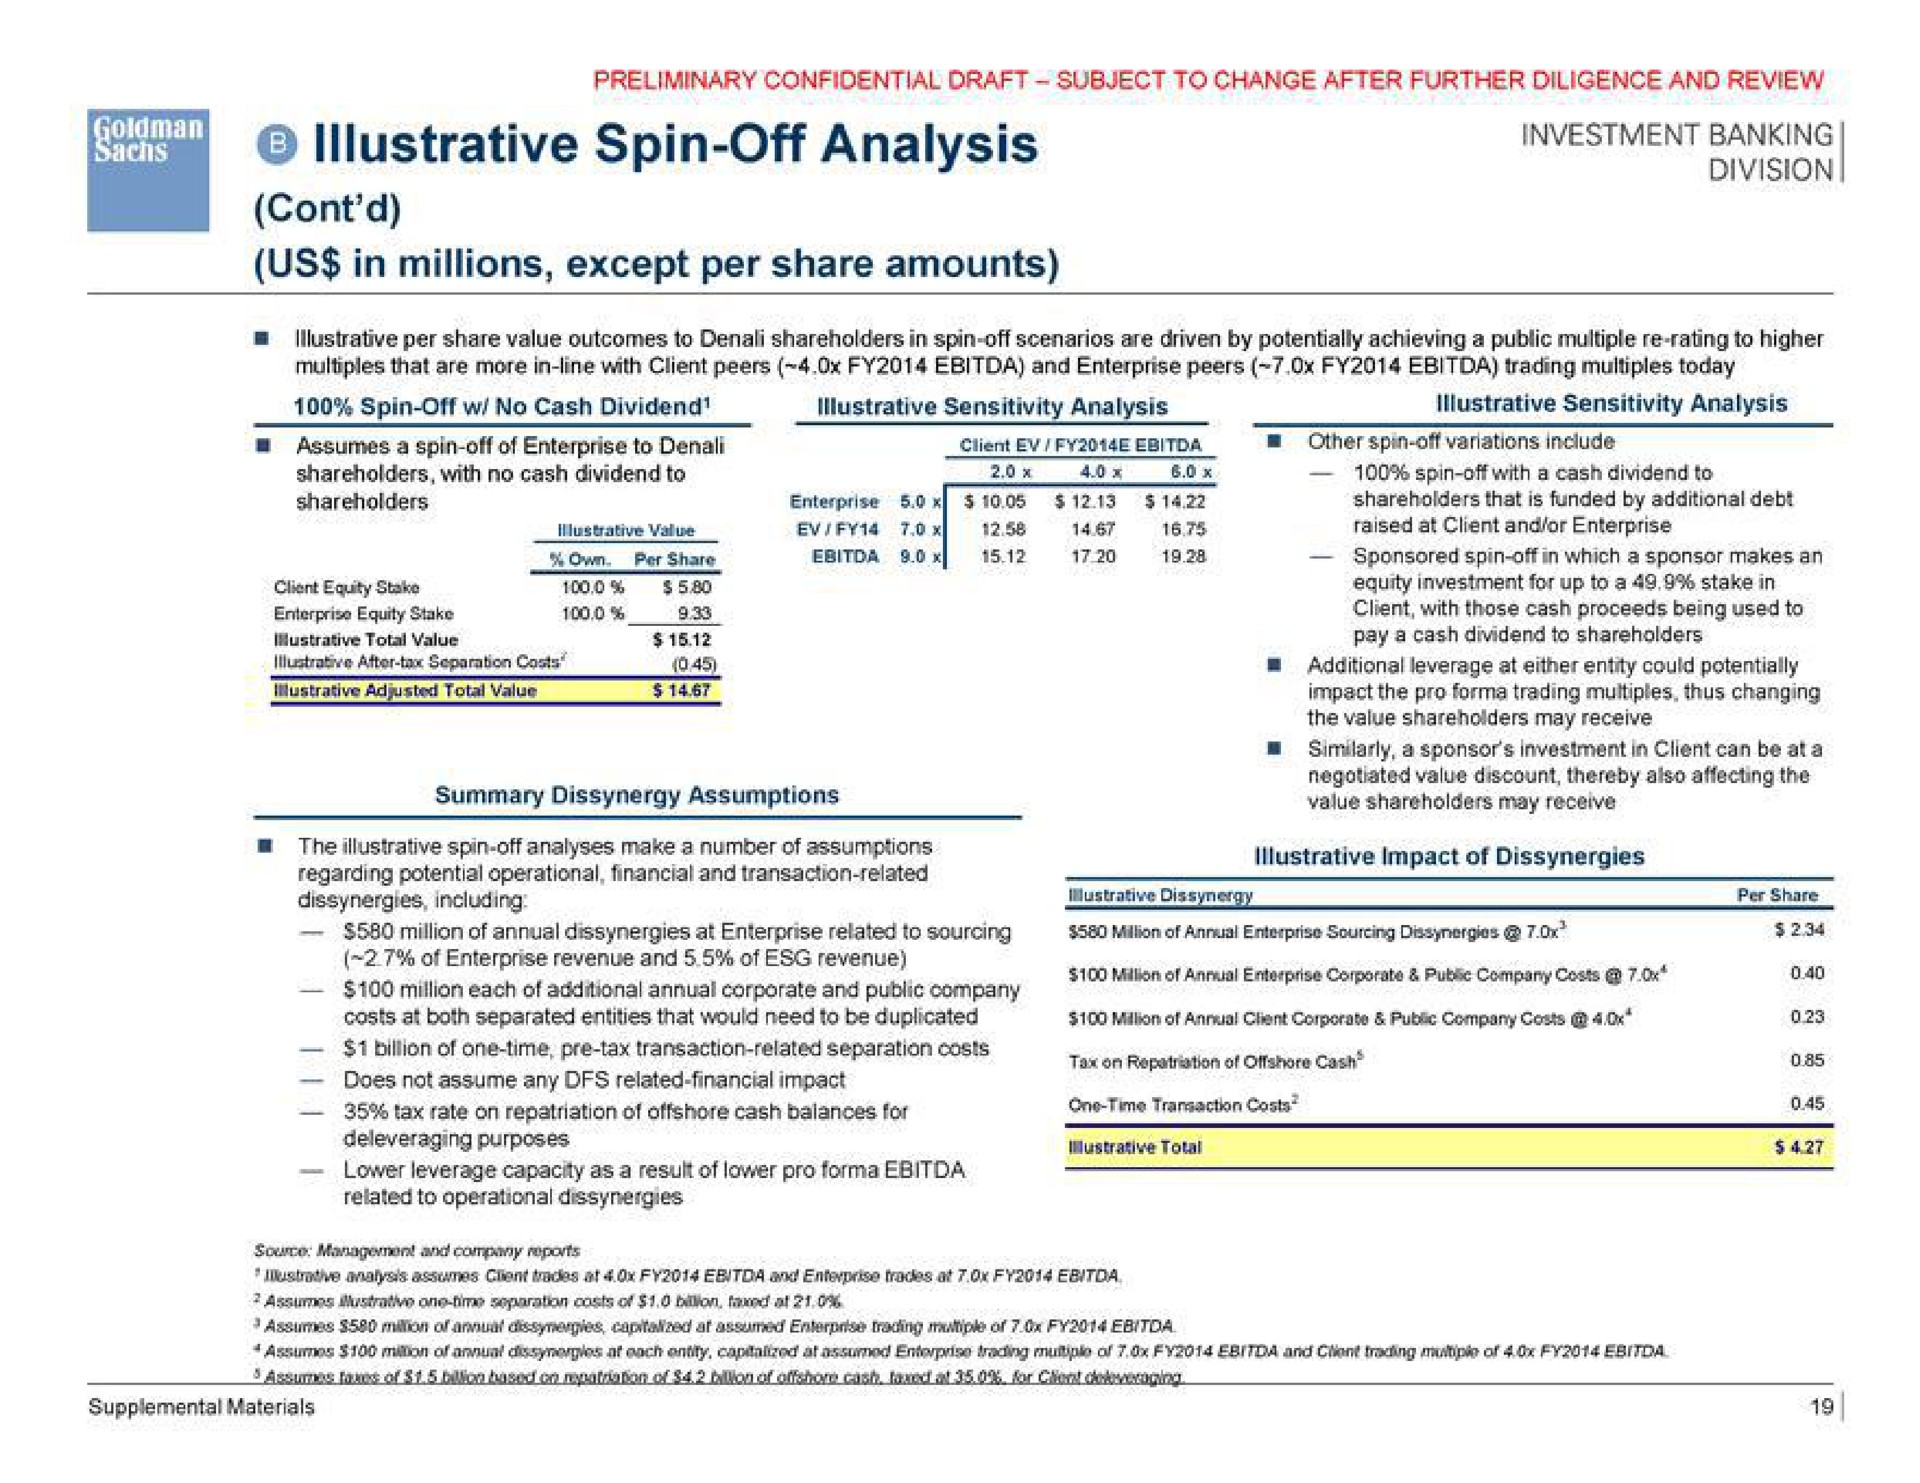 illustrative spin off analysis investment banking division us in millions except per share amounts | Goldman Sachs